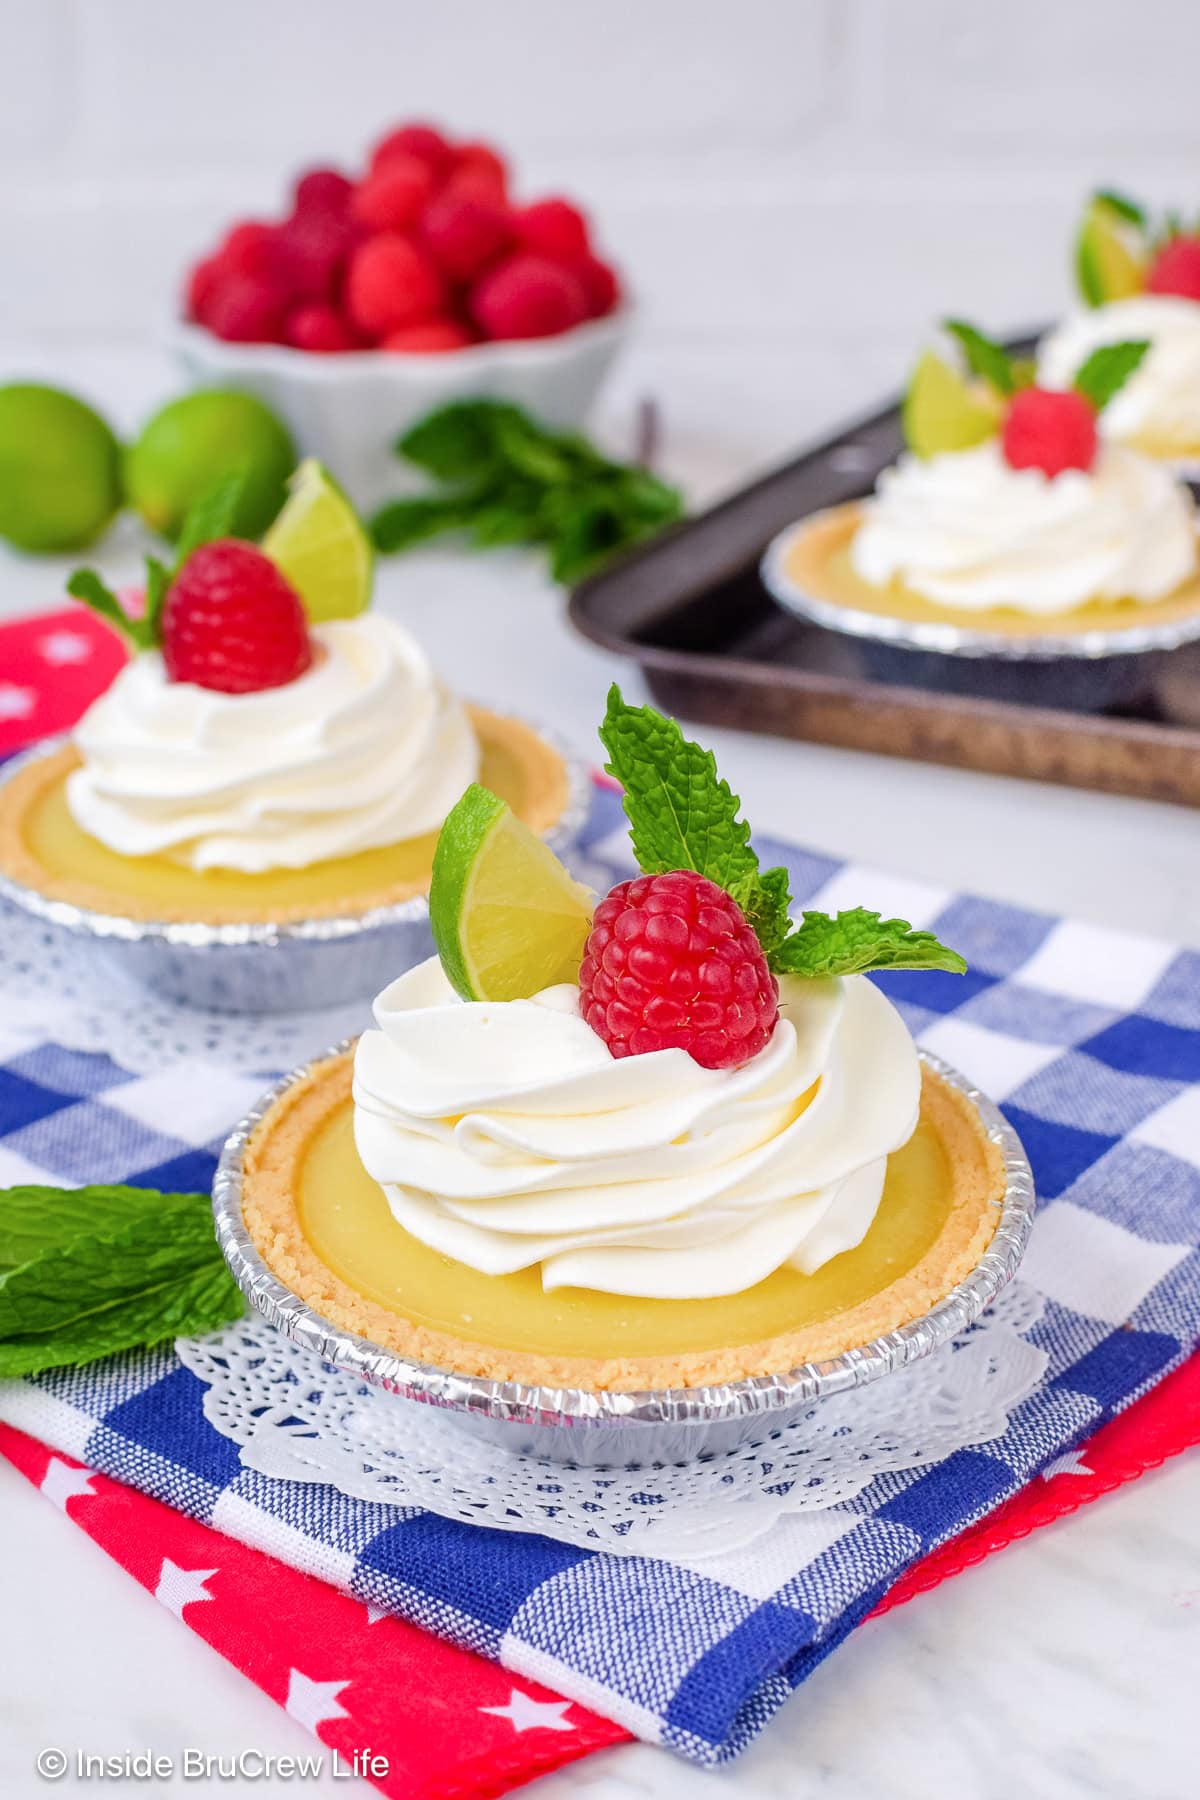 Mini pies topped with whipped cream and raspberries.